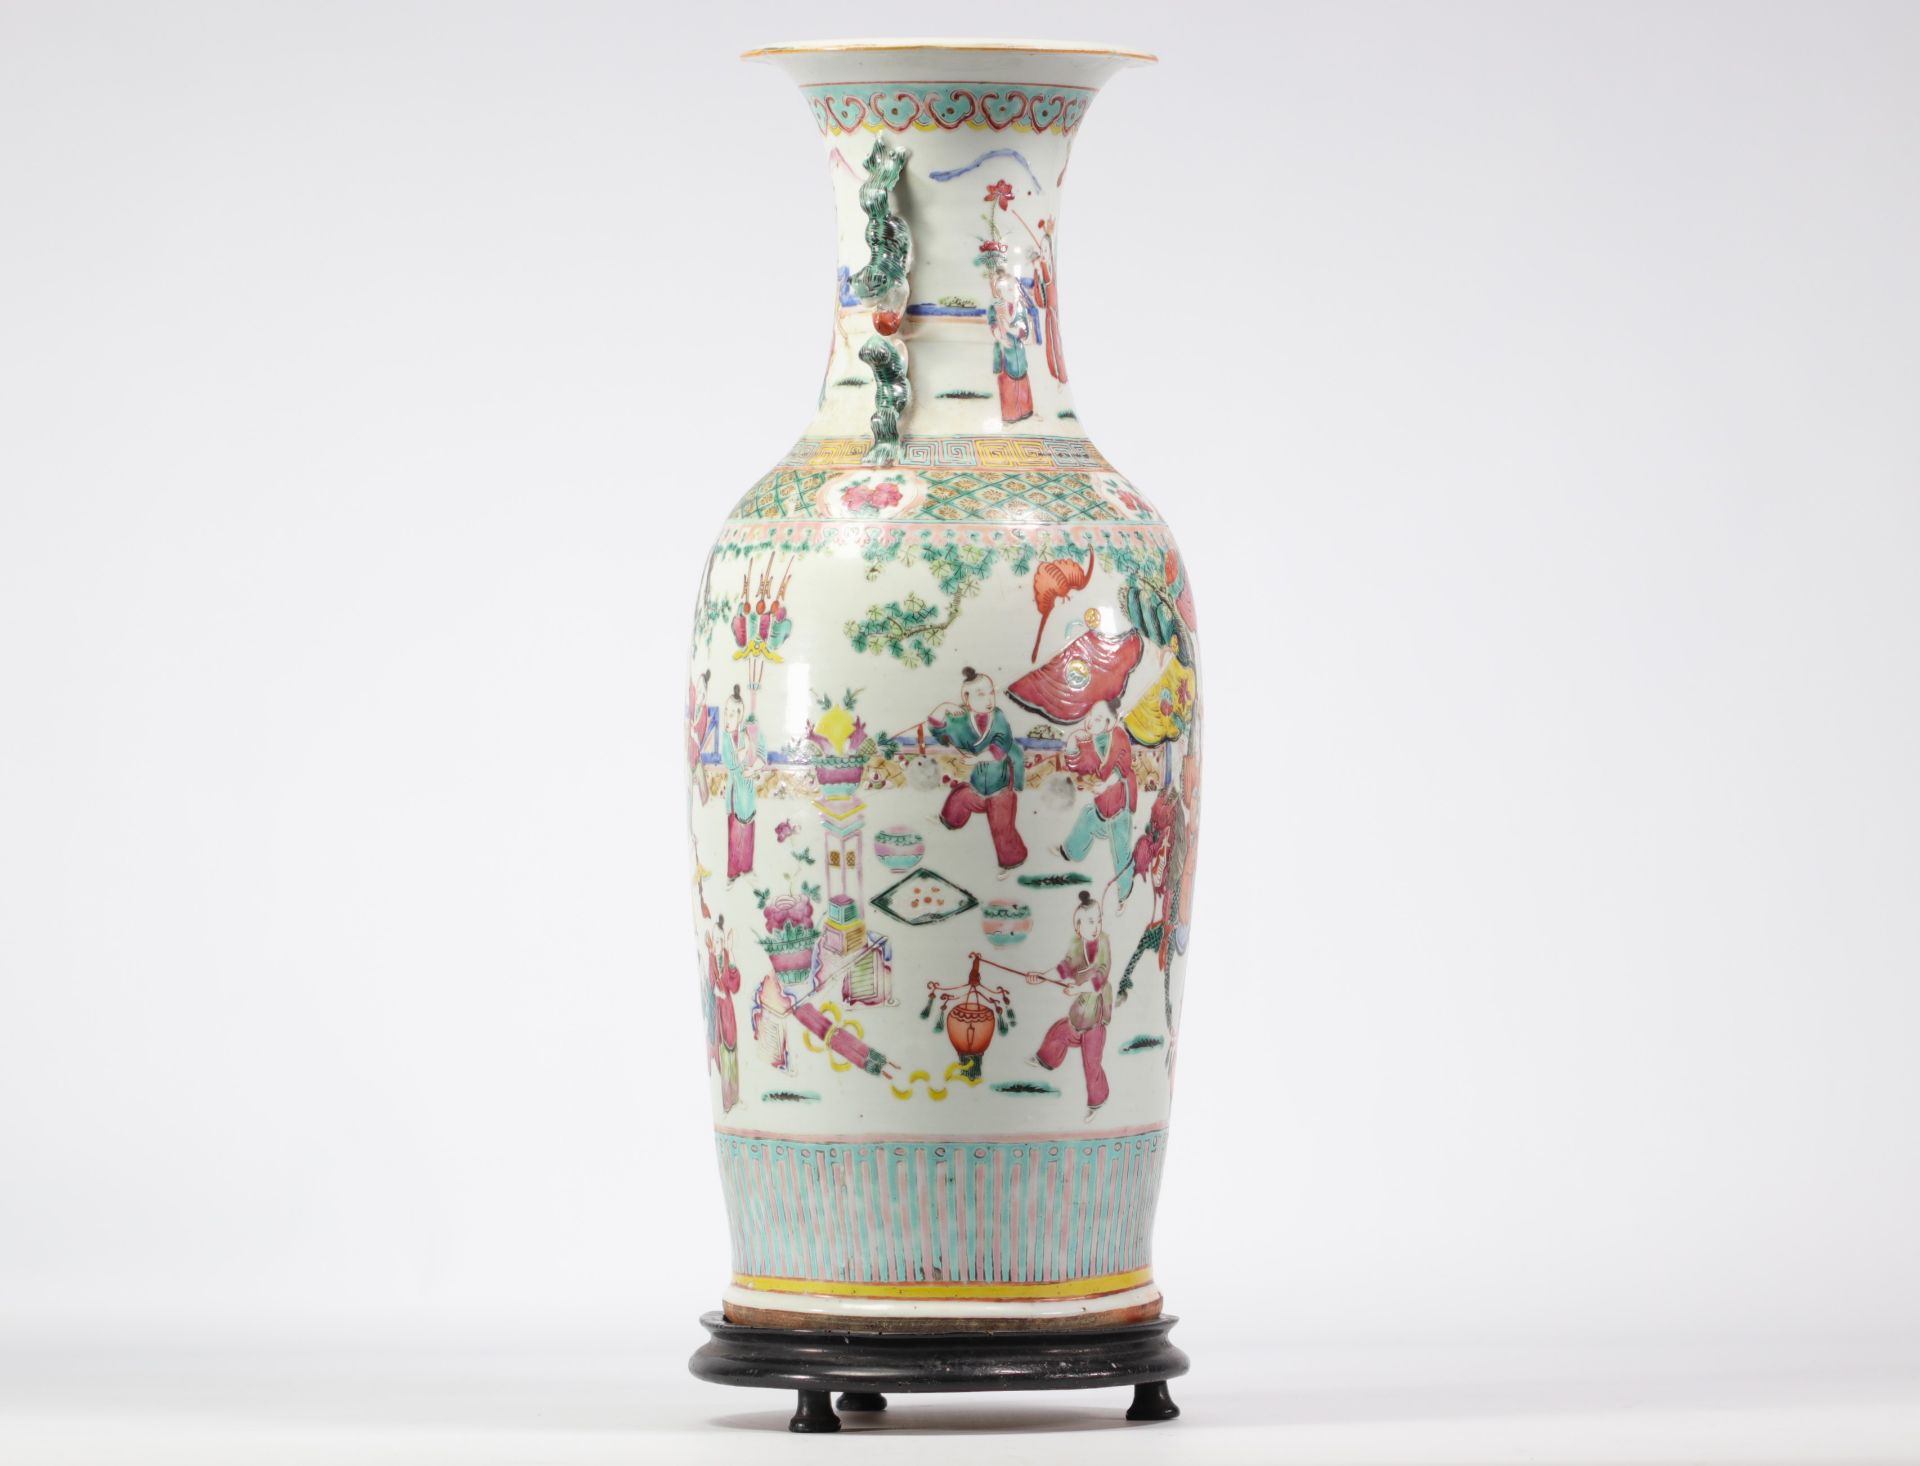 Large porcelain vase, famille rose, decorated with characters 19th century - Image 4 of 5